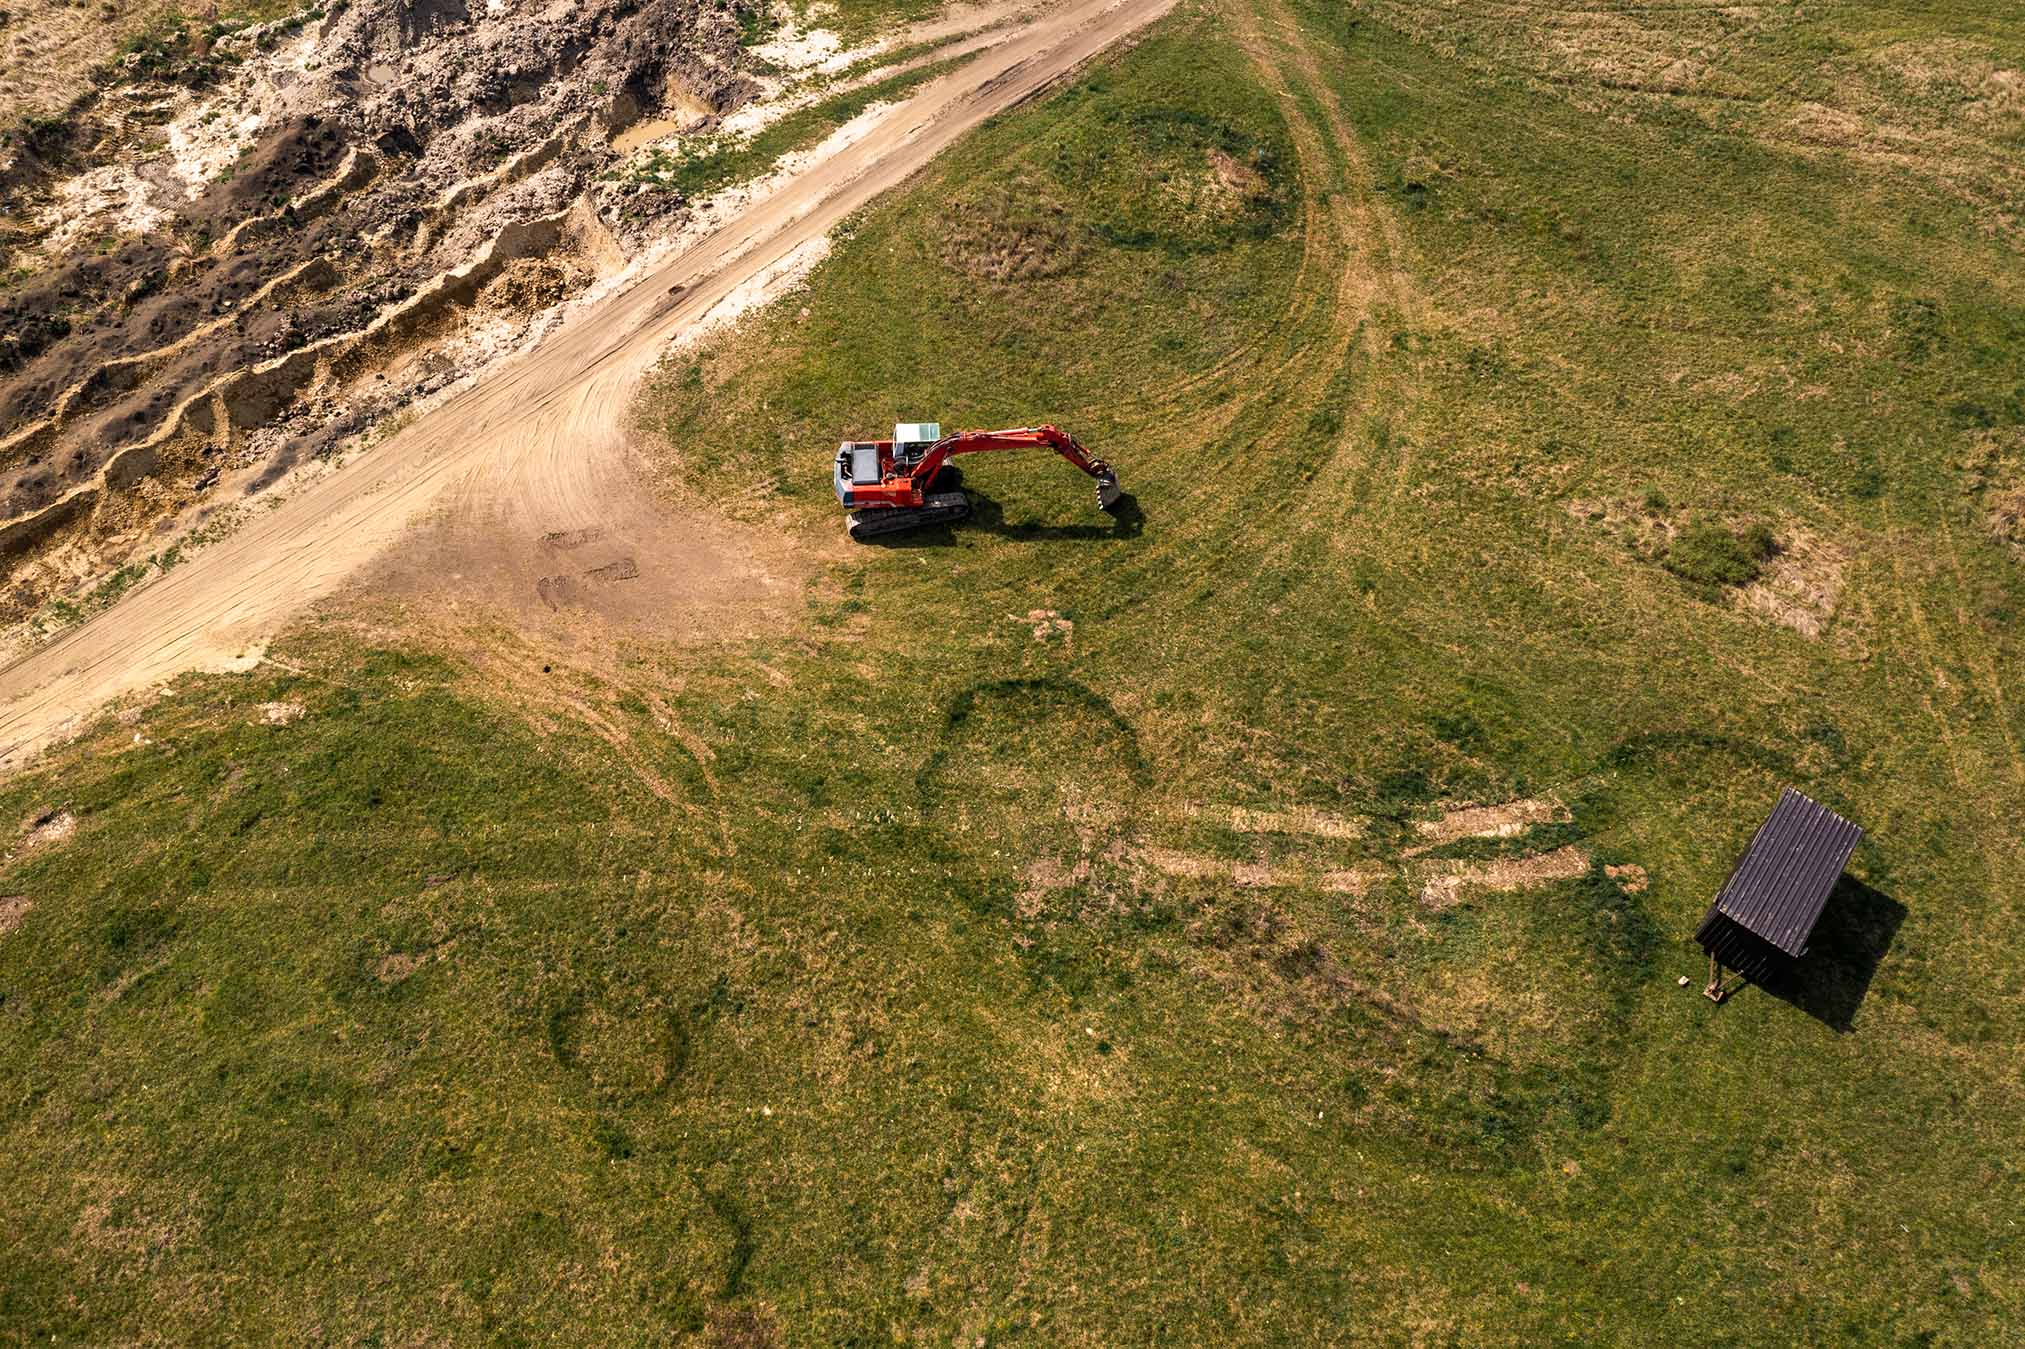 Excavator machinery on archeological site, aerial shot from drone pov, high angle view